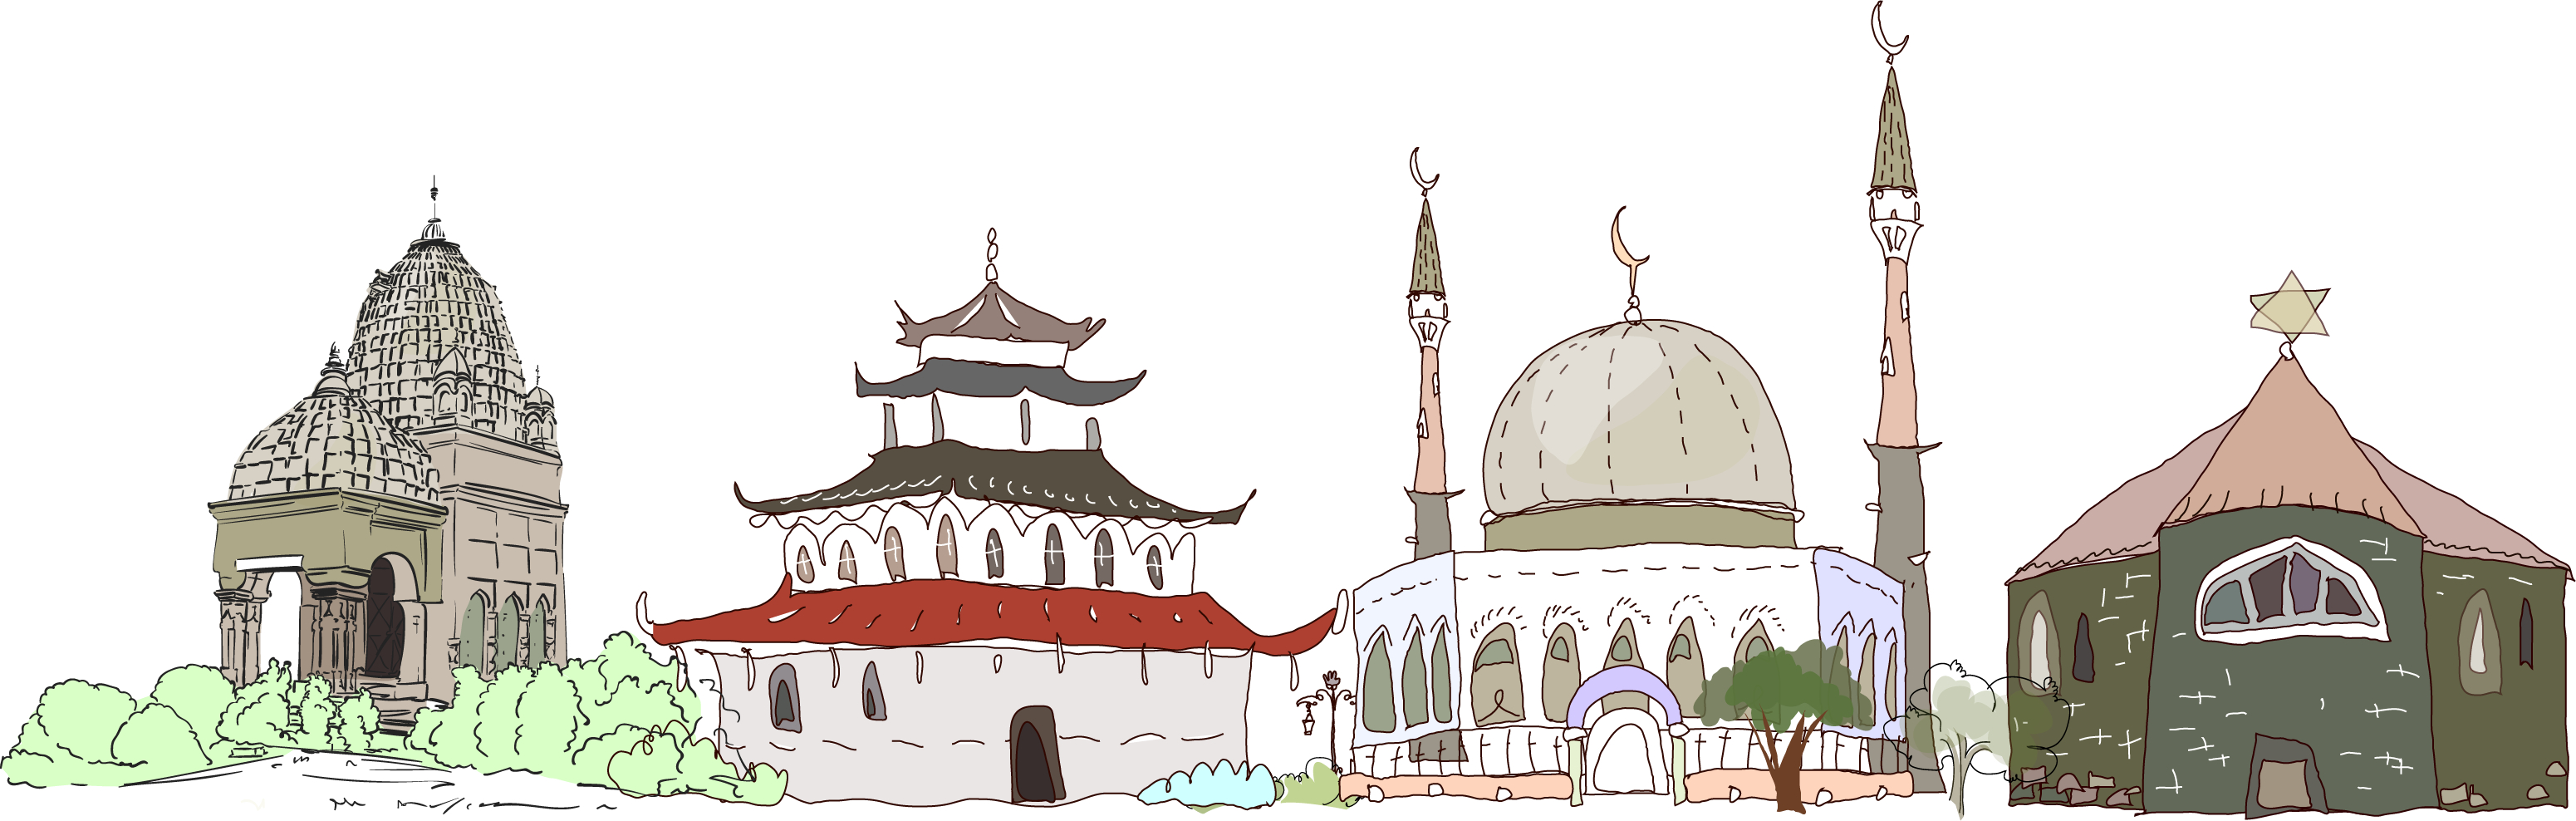 illustration of different religious buildings